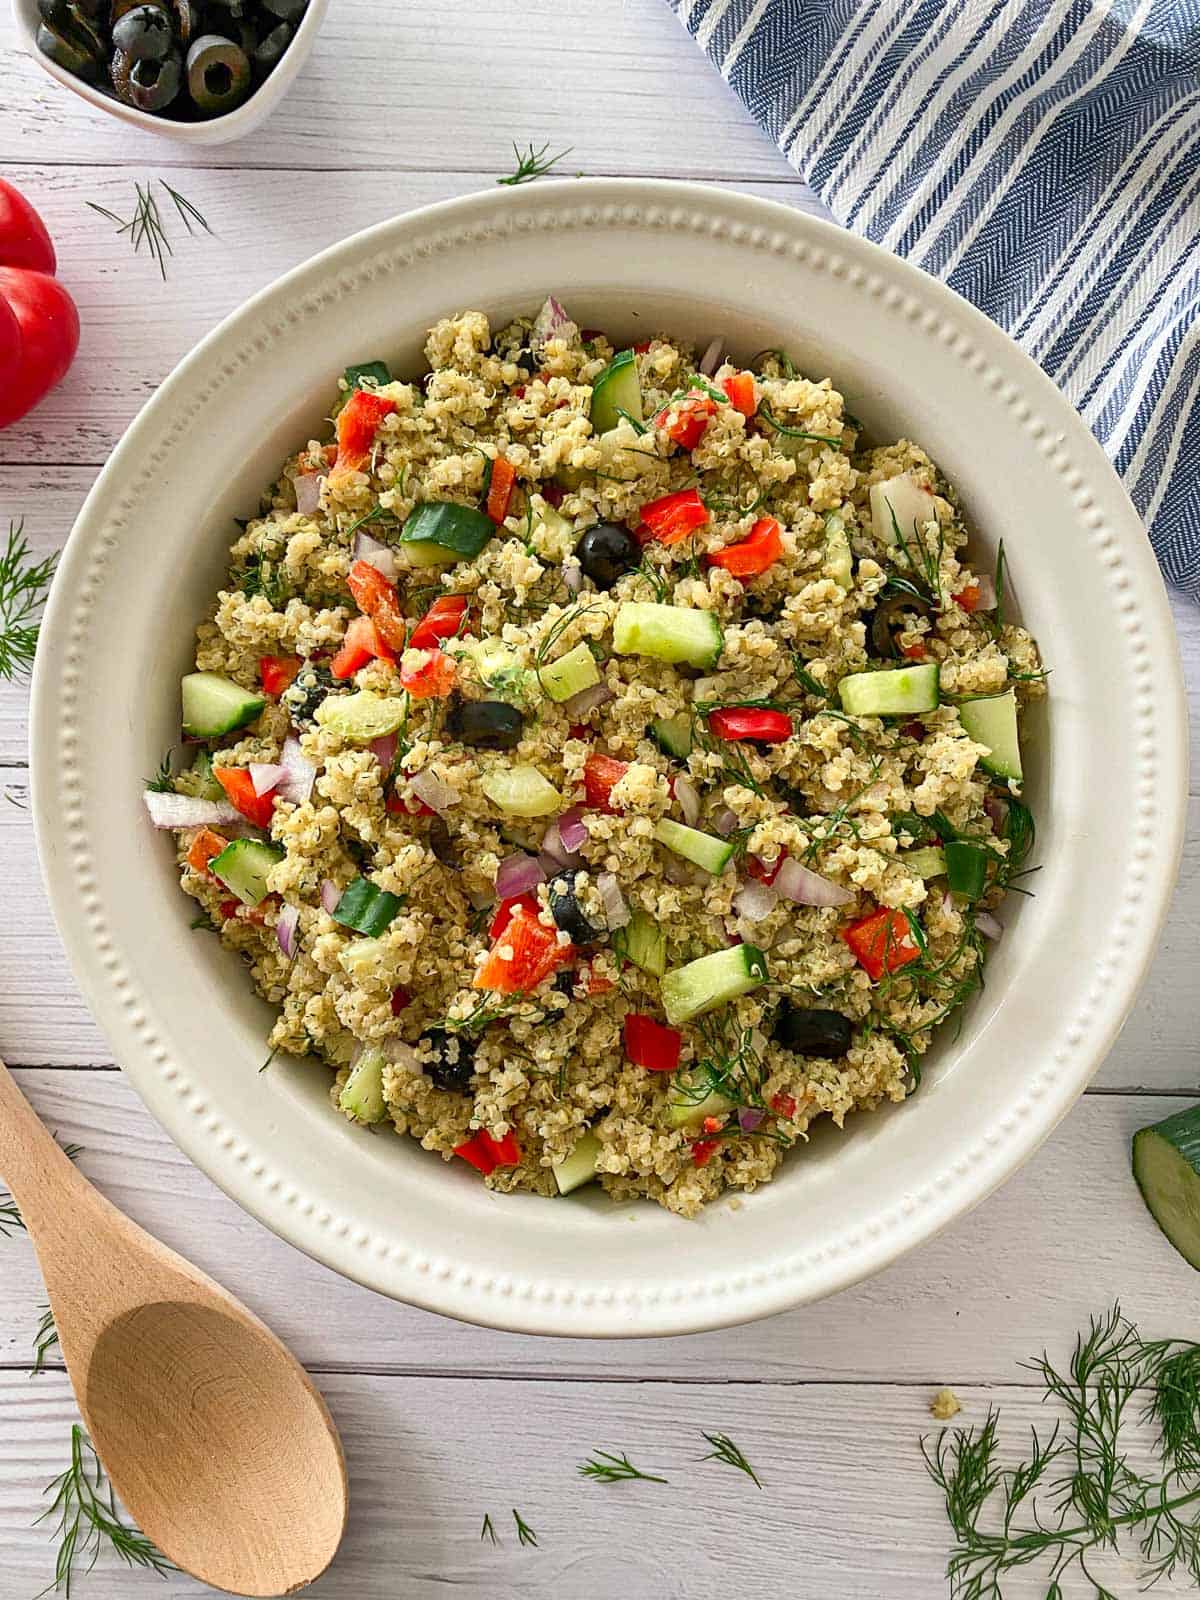 Large white bowl with quinoa, cucumber, red pepper, olives and dill.